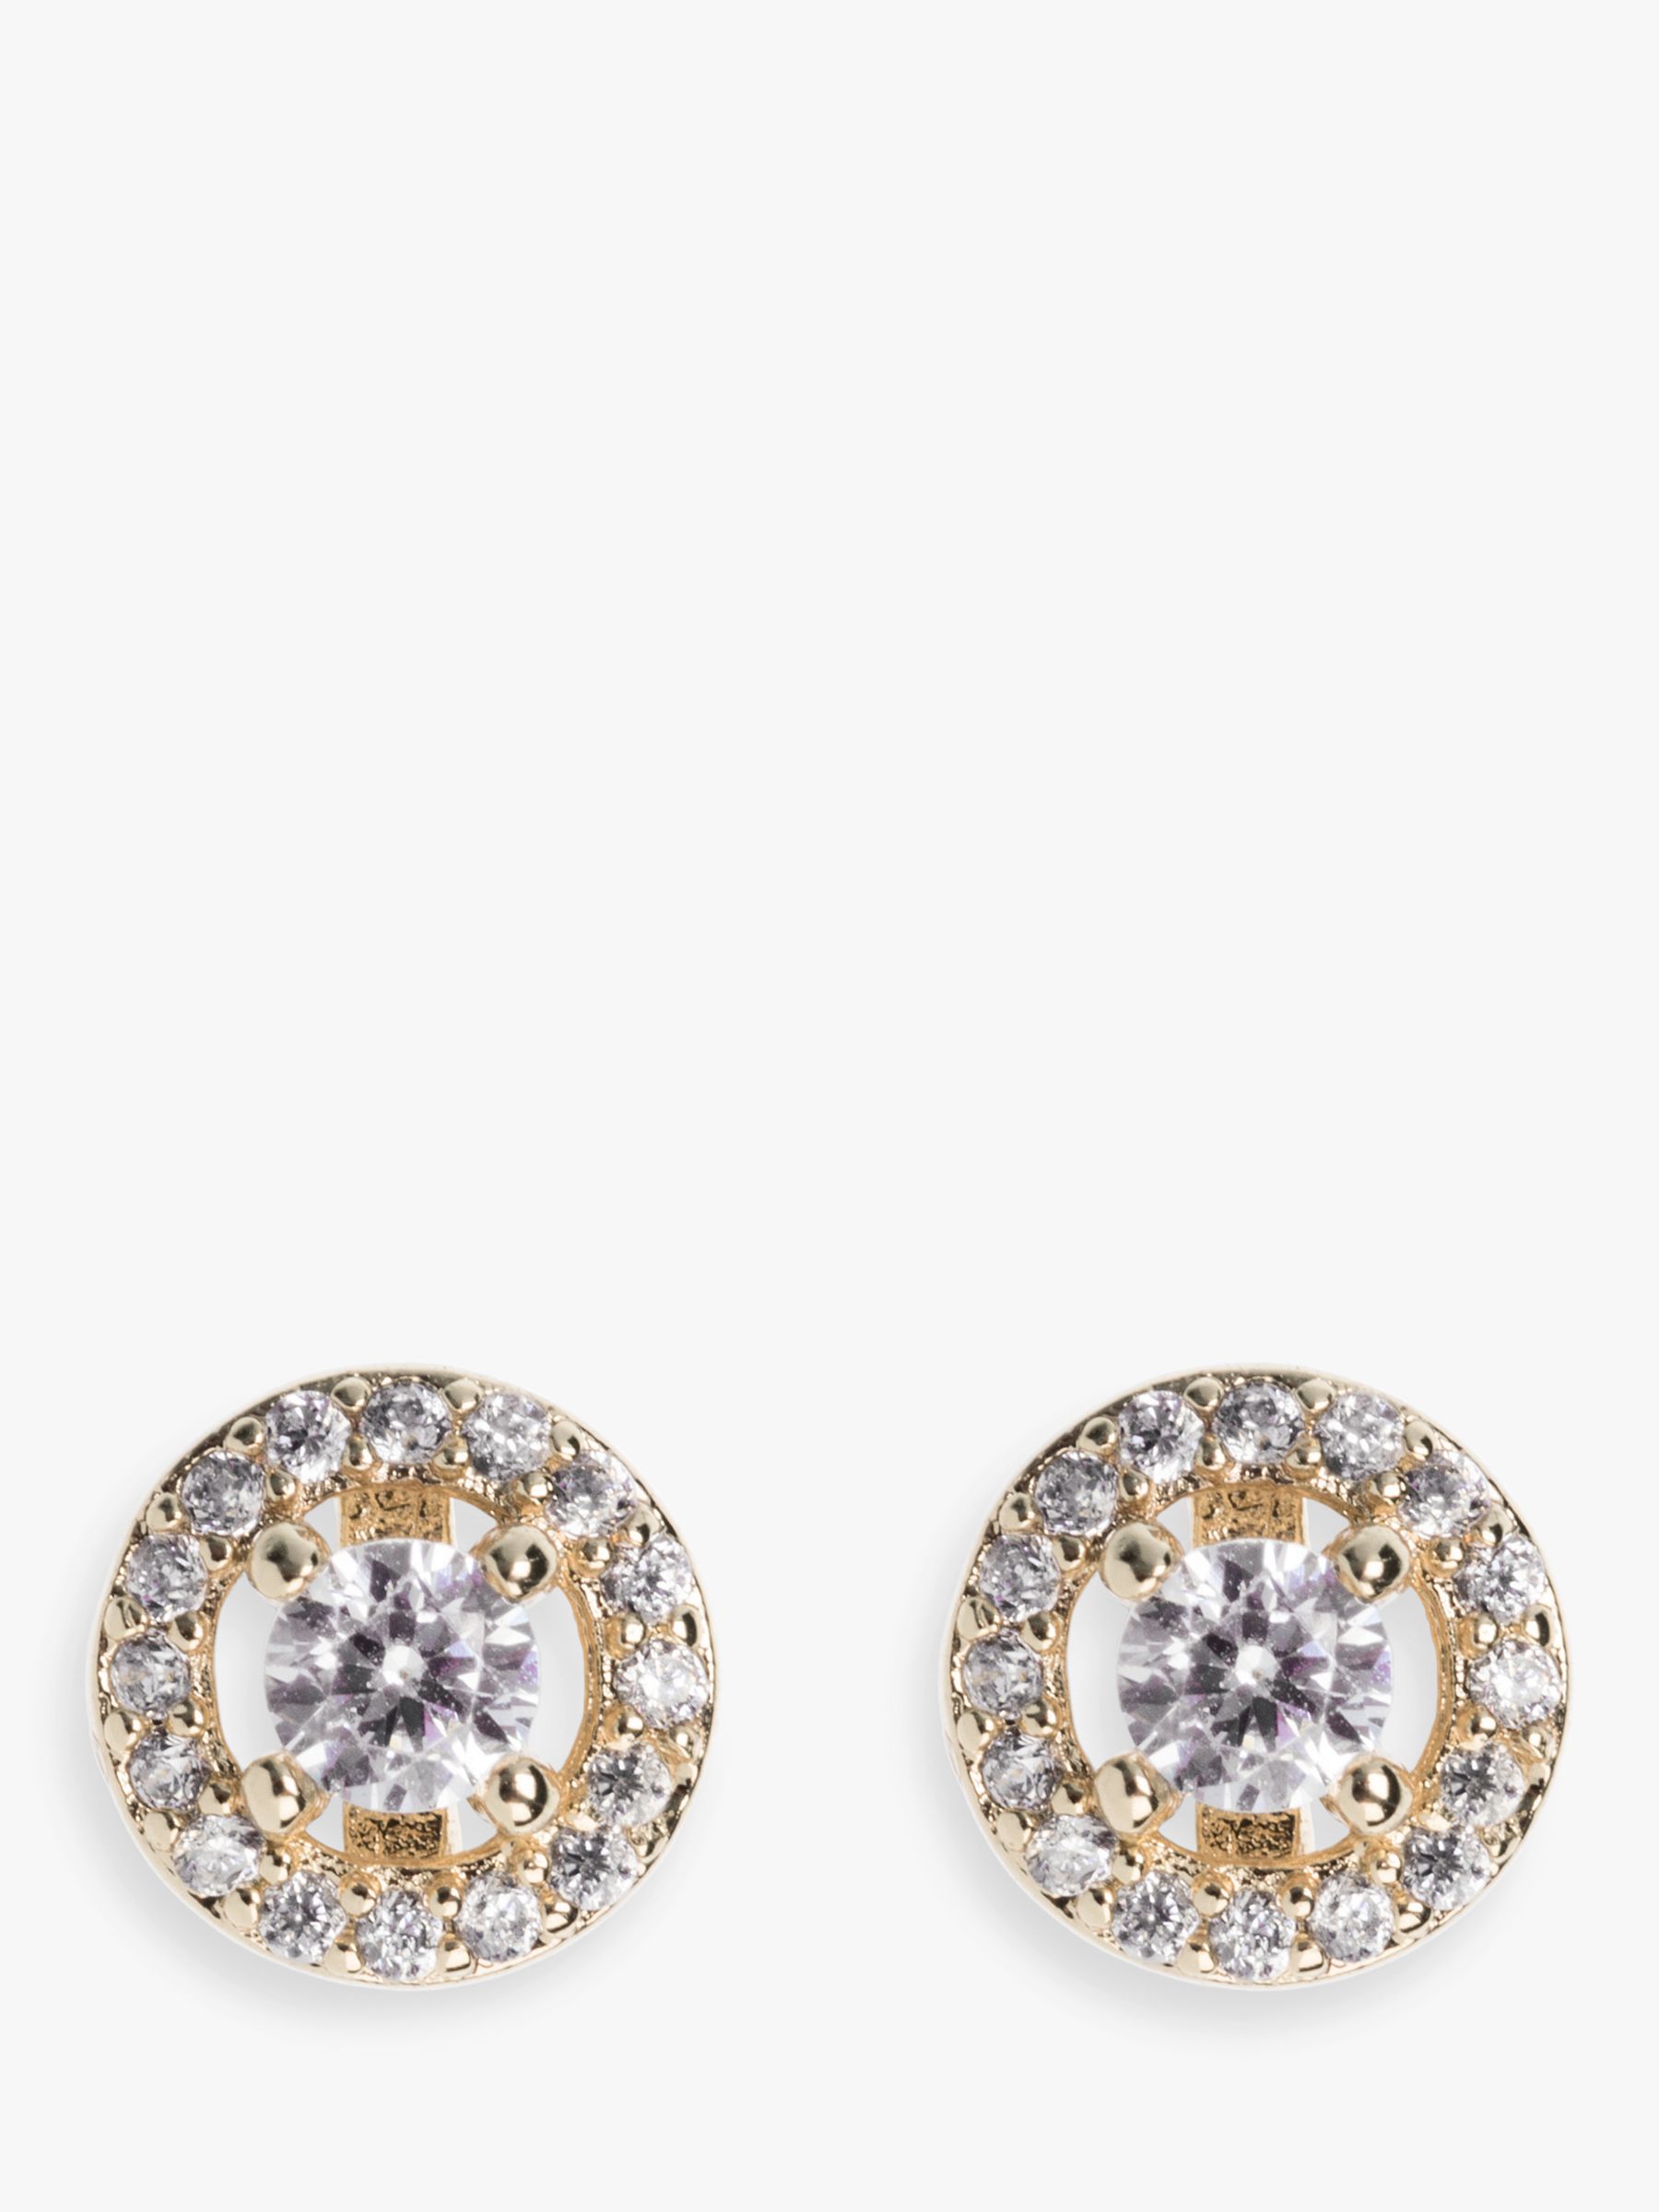 Ivory & Co. Balmoral Round Stud Earrings